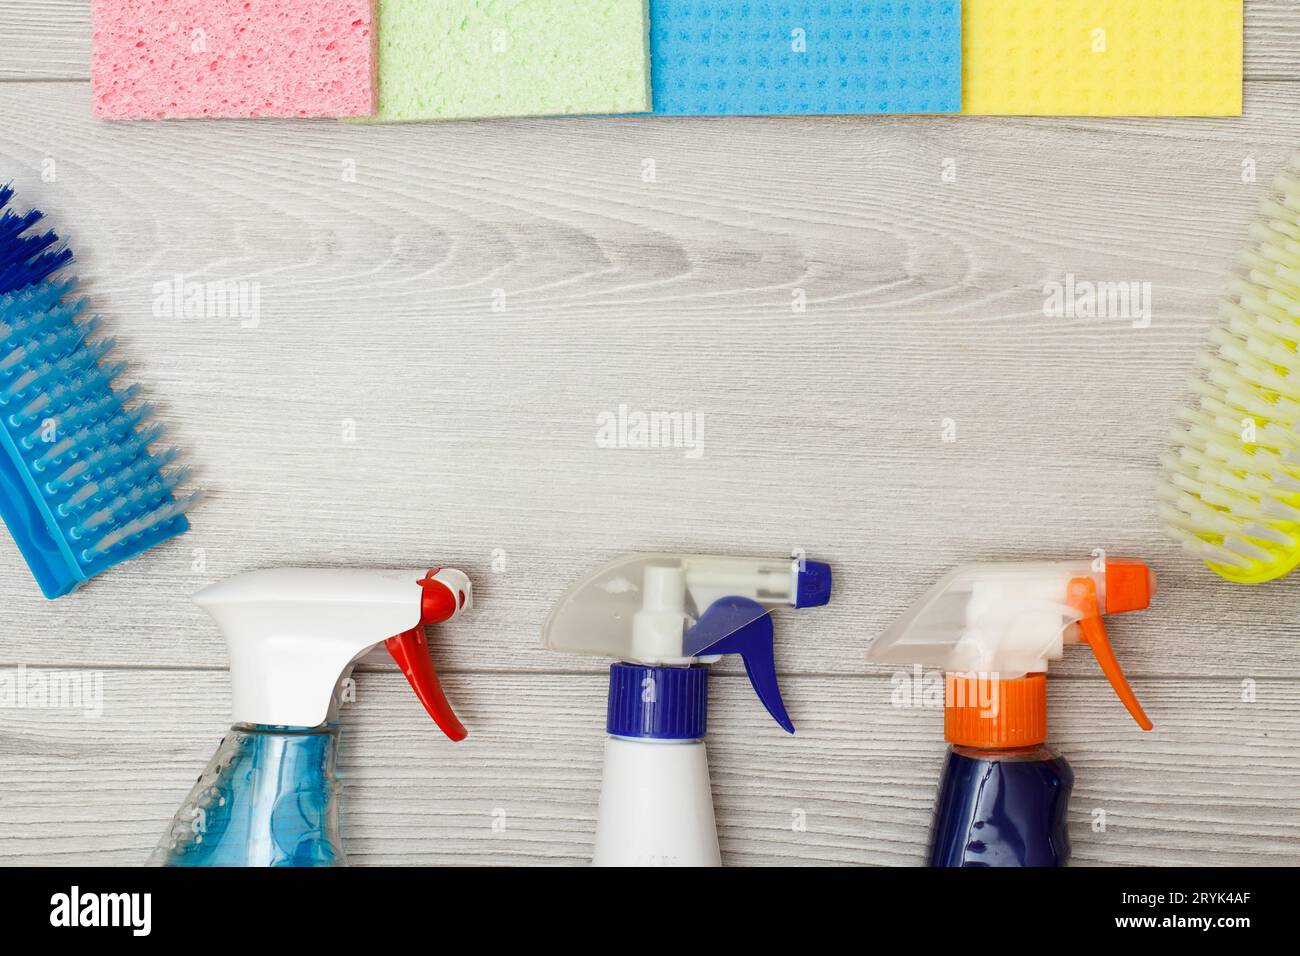 Bottles of detergent, color microfiber napkins and synthetic brushes for cleaning. Stock Photo